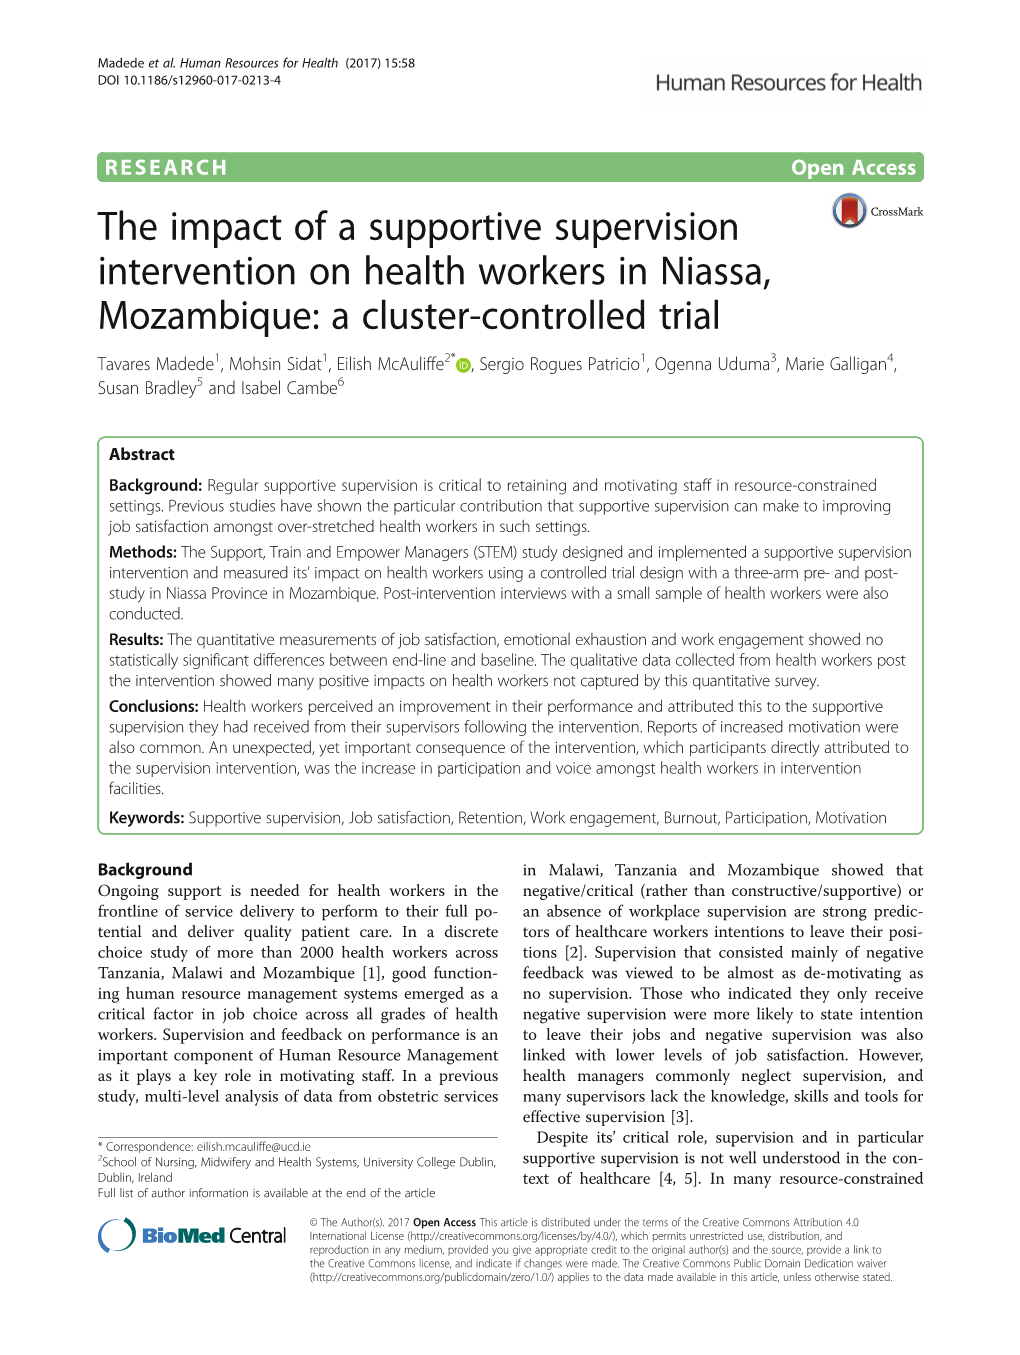 The Impact of a Supportive Supervision Intervention on Health Workers In